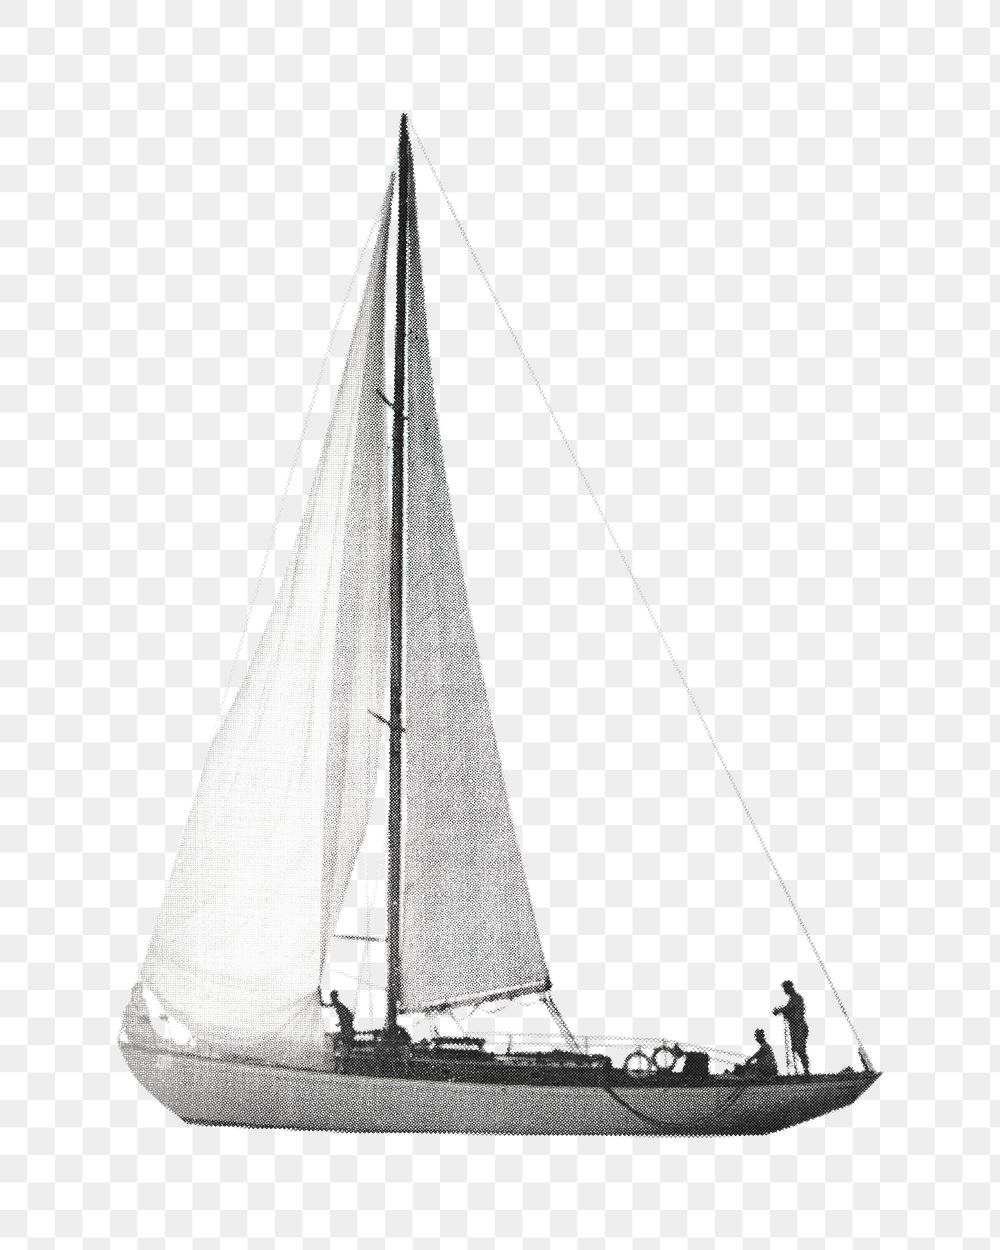 Sailboat png, vehicle image, transparent background. Remixed by rawpixel.